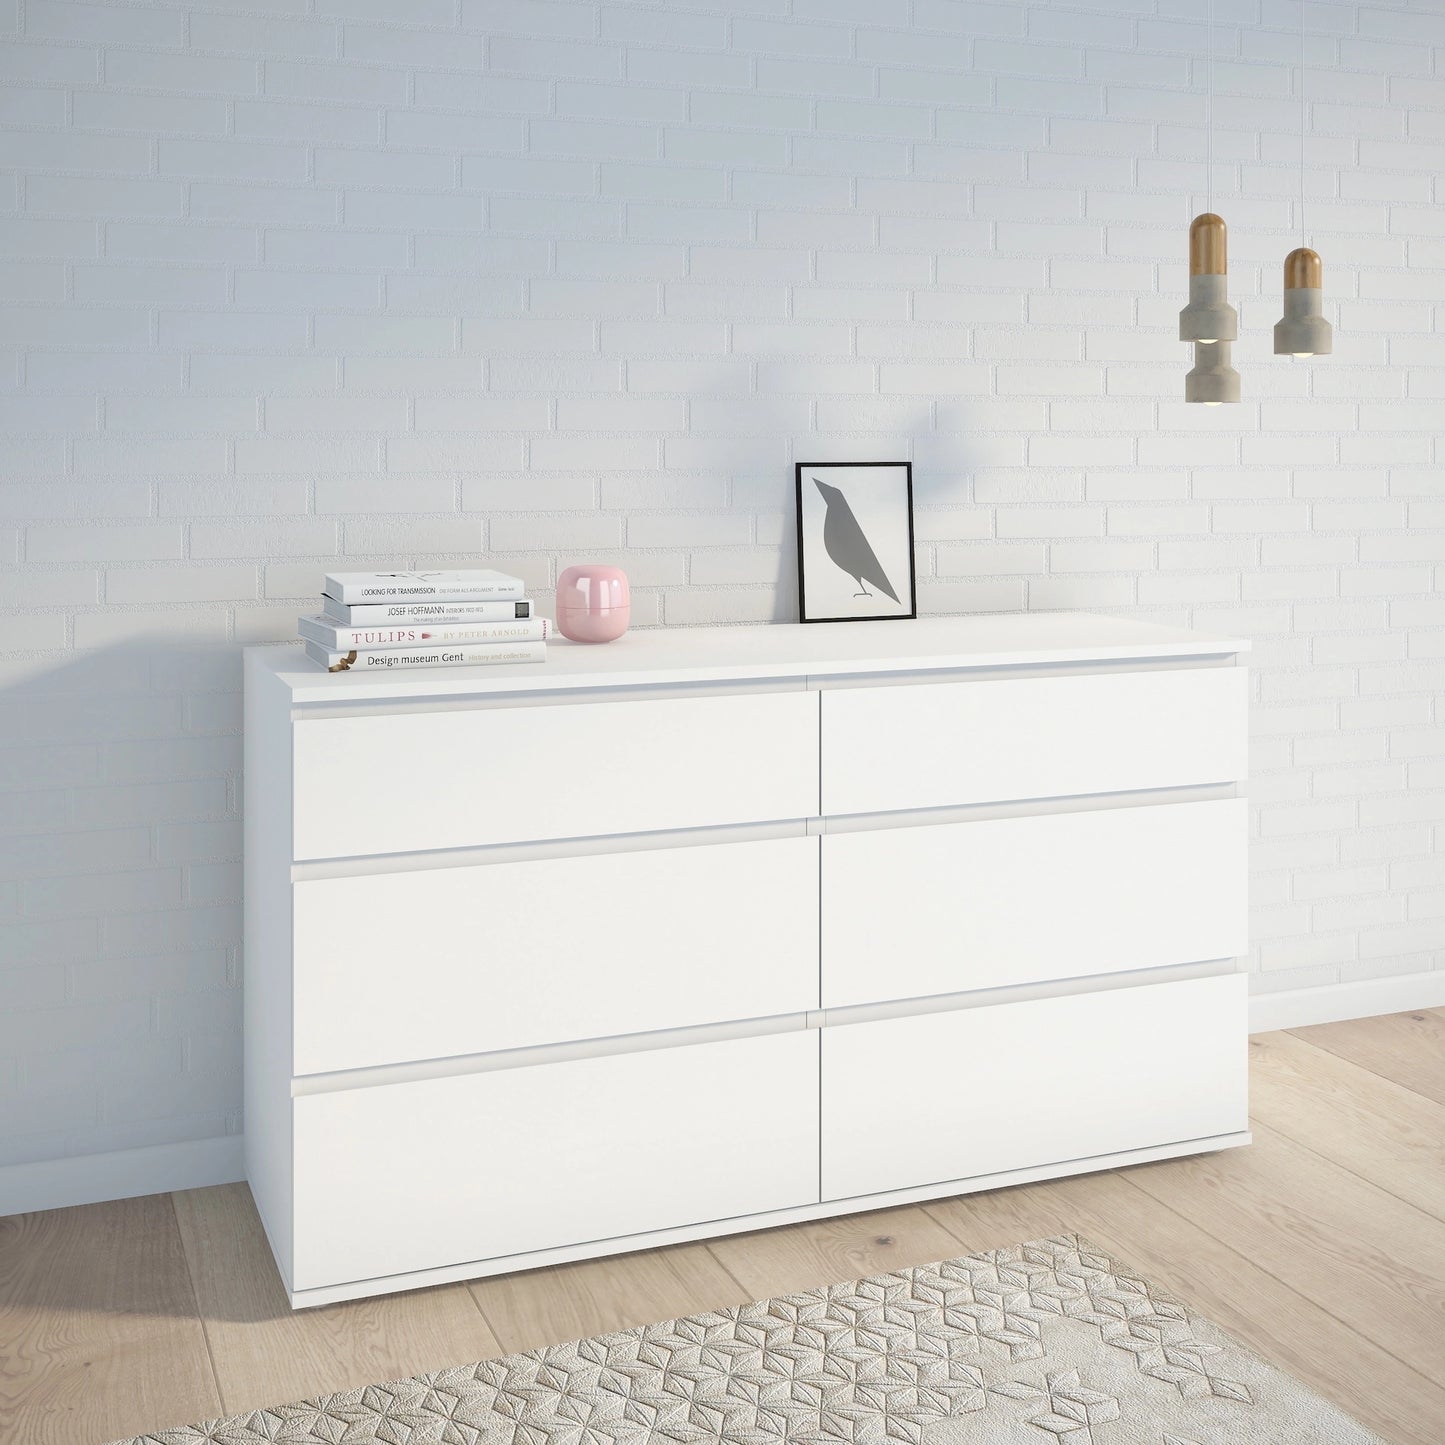 Furniture To Go Nova Wide Chest of 6 Drawers (3+3) in White